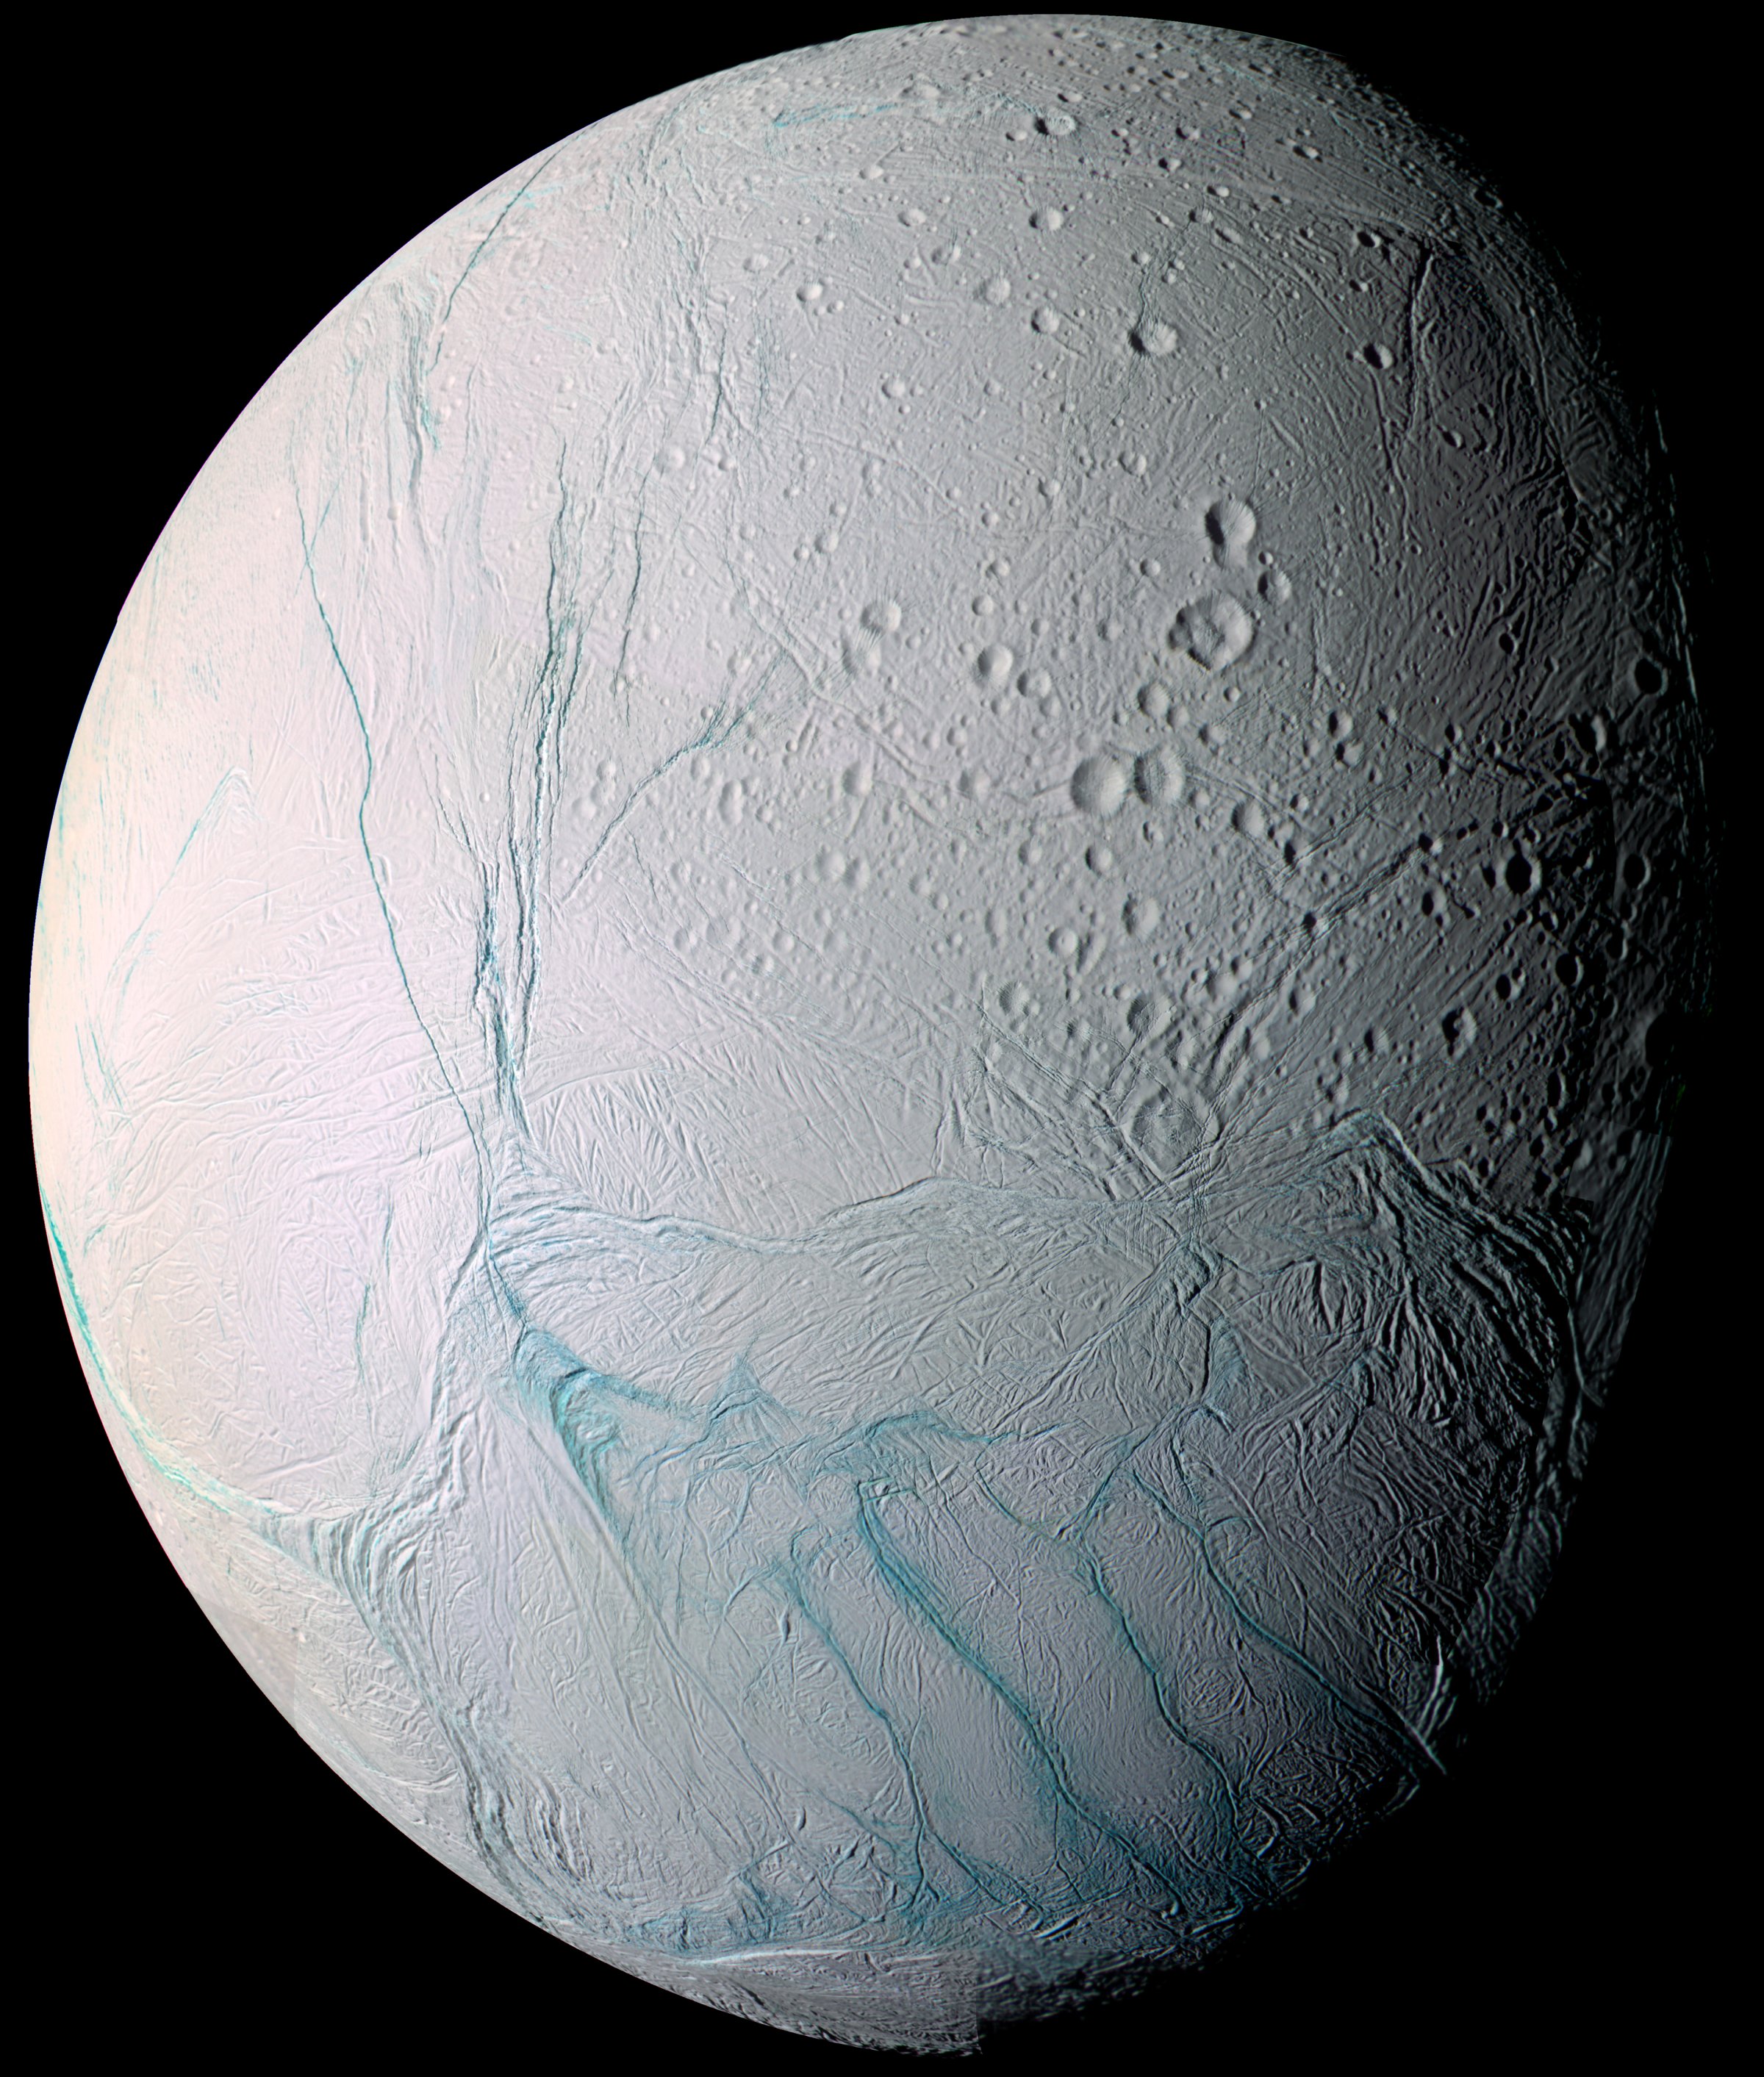 Saturn's moon Enceladus, photographed by the Cassini spacecraft.